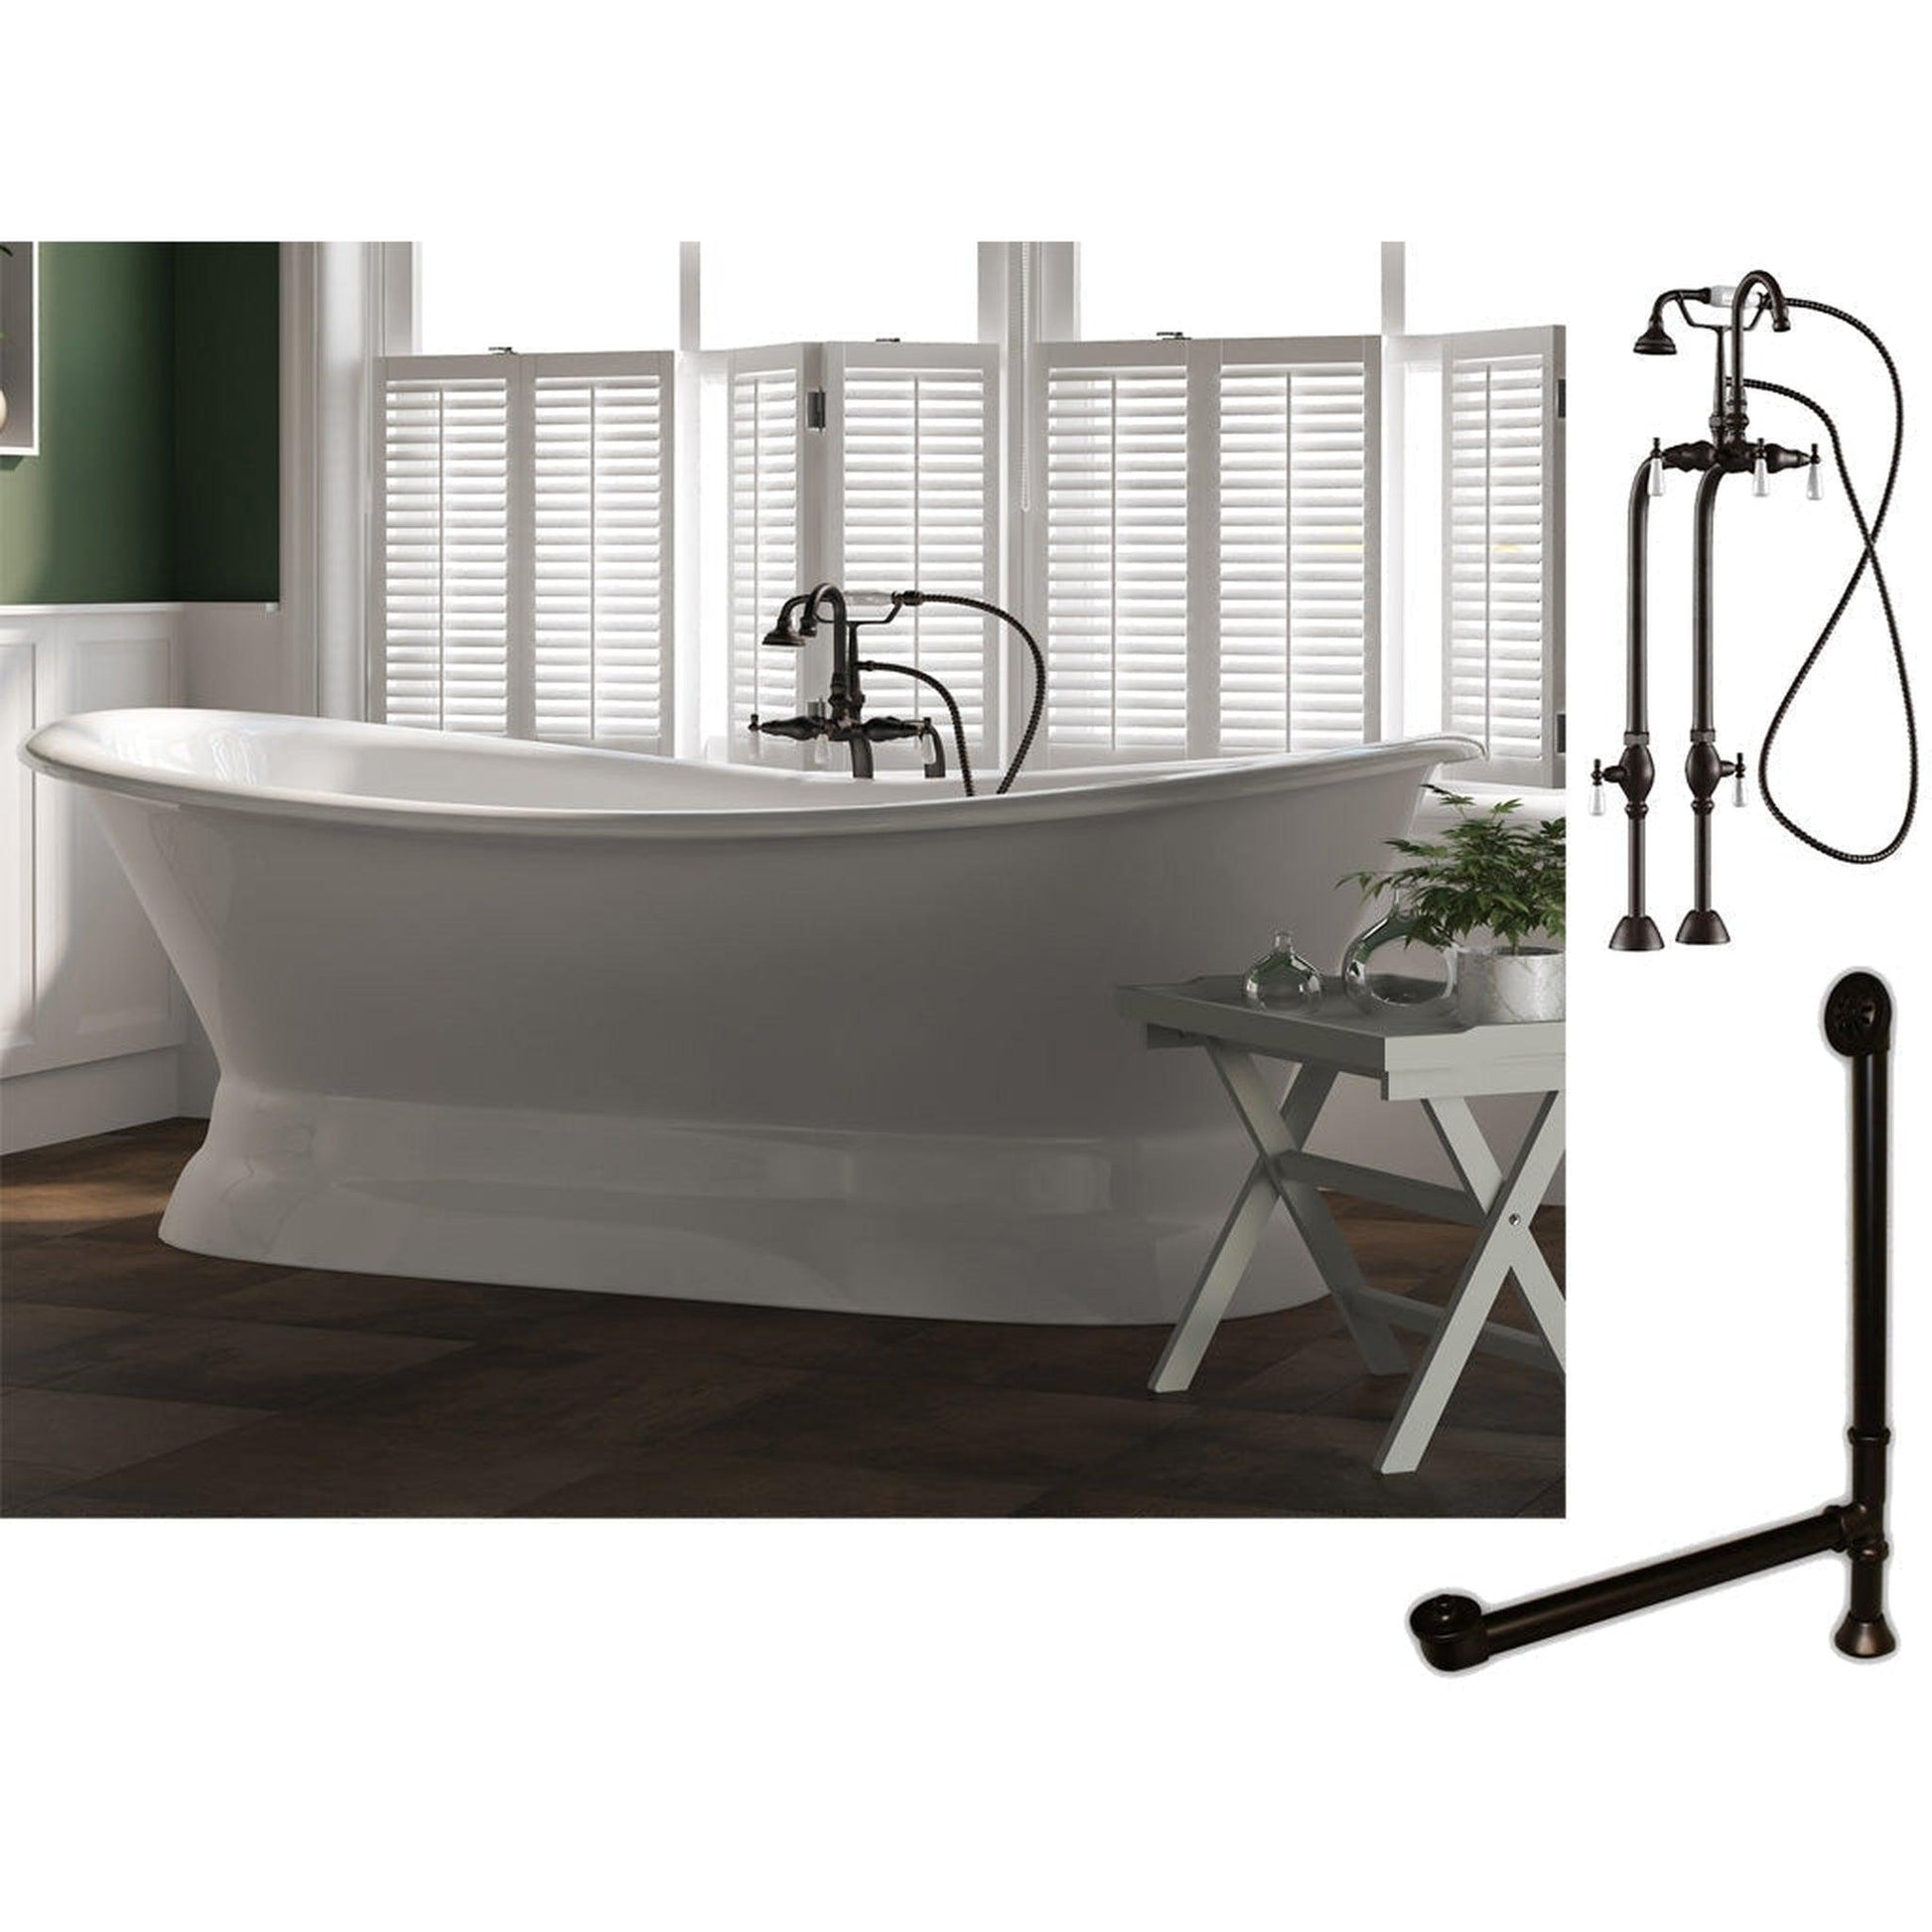 Cambridge Plumbing 71" White Cast Iron Double Slipper Pedestal Bathtub With No Faucet Holes And Complete Plumbing Package Including Freestanding English Telephone Gooseneck Faucet, Drain And Overflow Assembly In Oil Rubbed Bronze